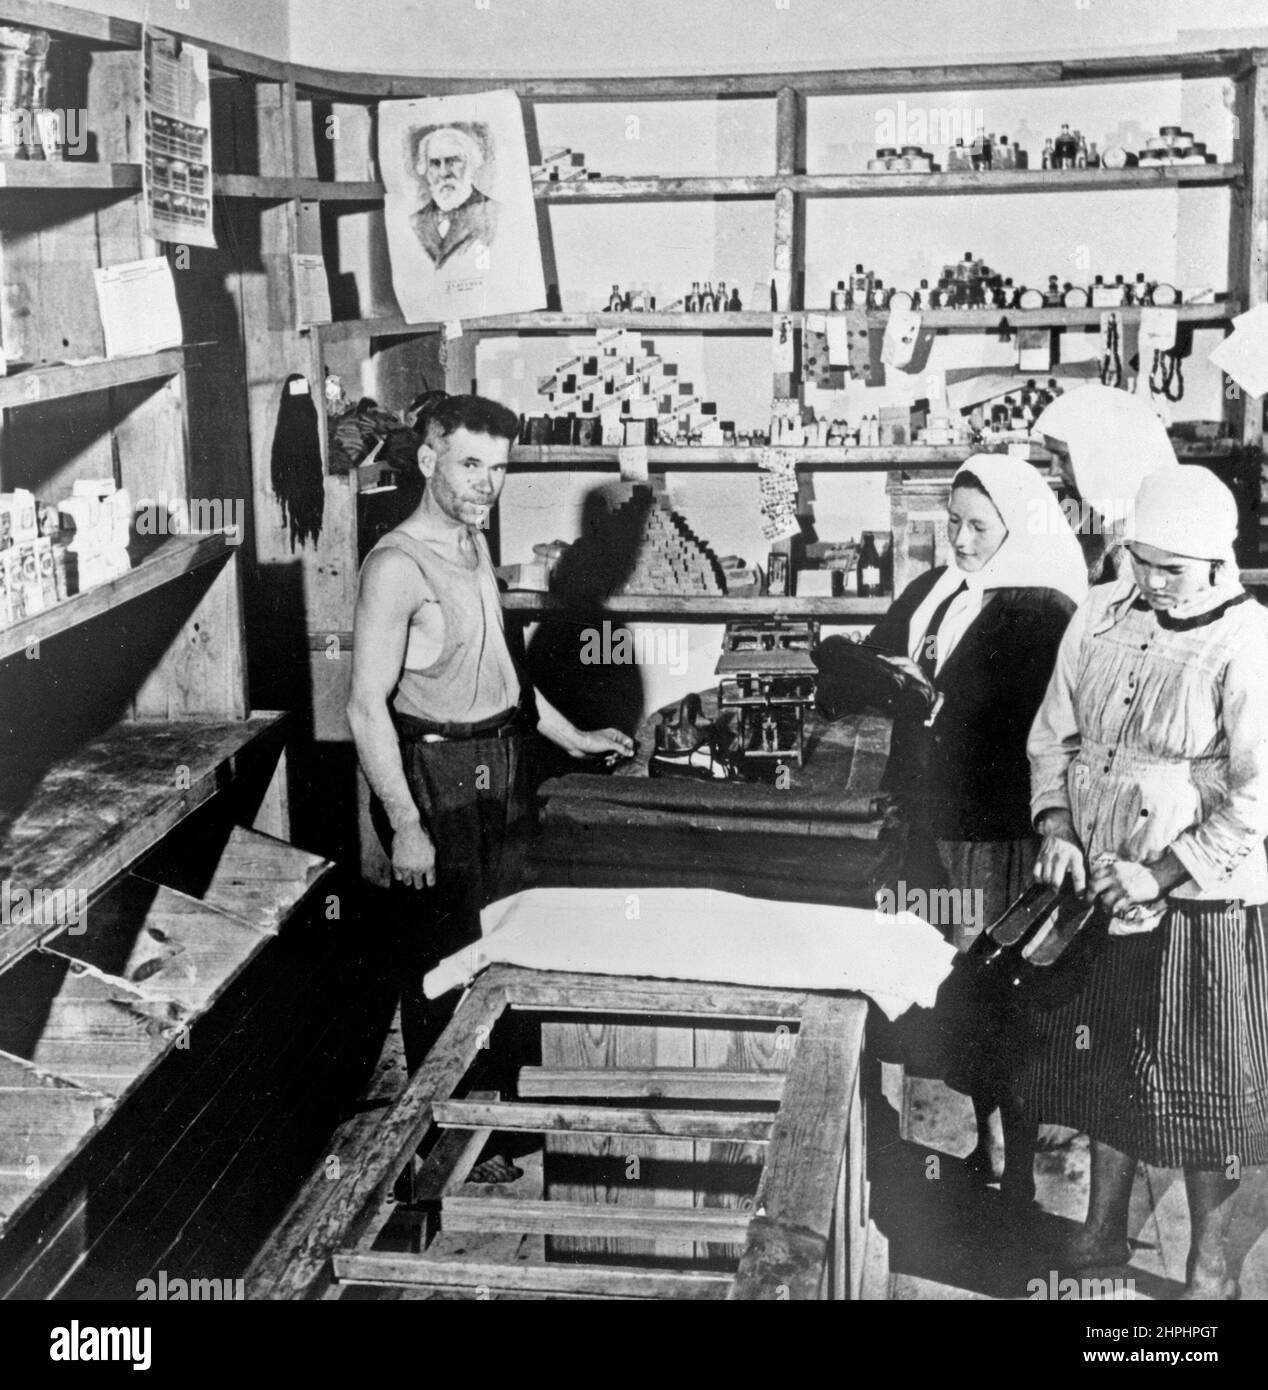 Original caption: Shoes are scarce in workers paradise. Soviet farm women in the Ukraine look at a consignment of over-shoes just received at the village store. Such shipments are scarce and are eagerly awaited. Notice the empty bins and shelves in the foreground. ca.  1951 Stock Photo